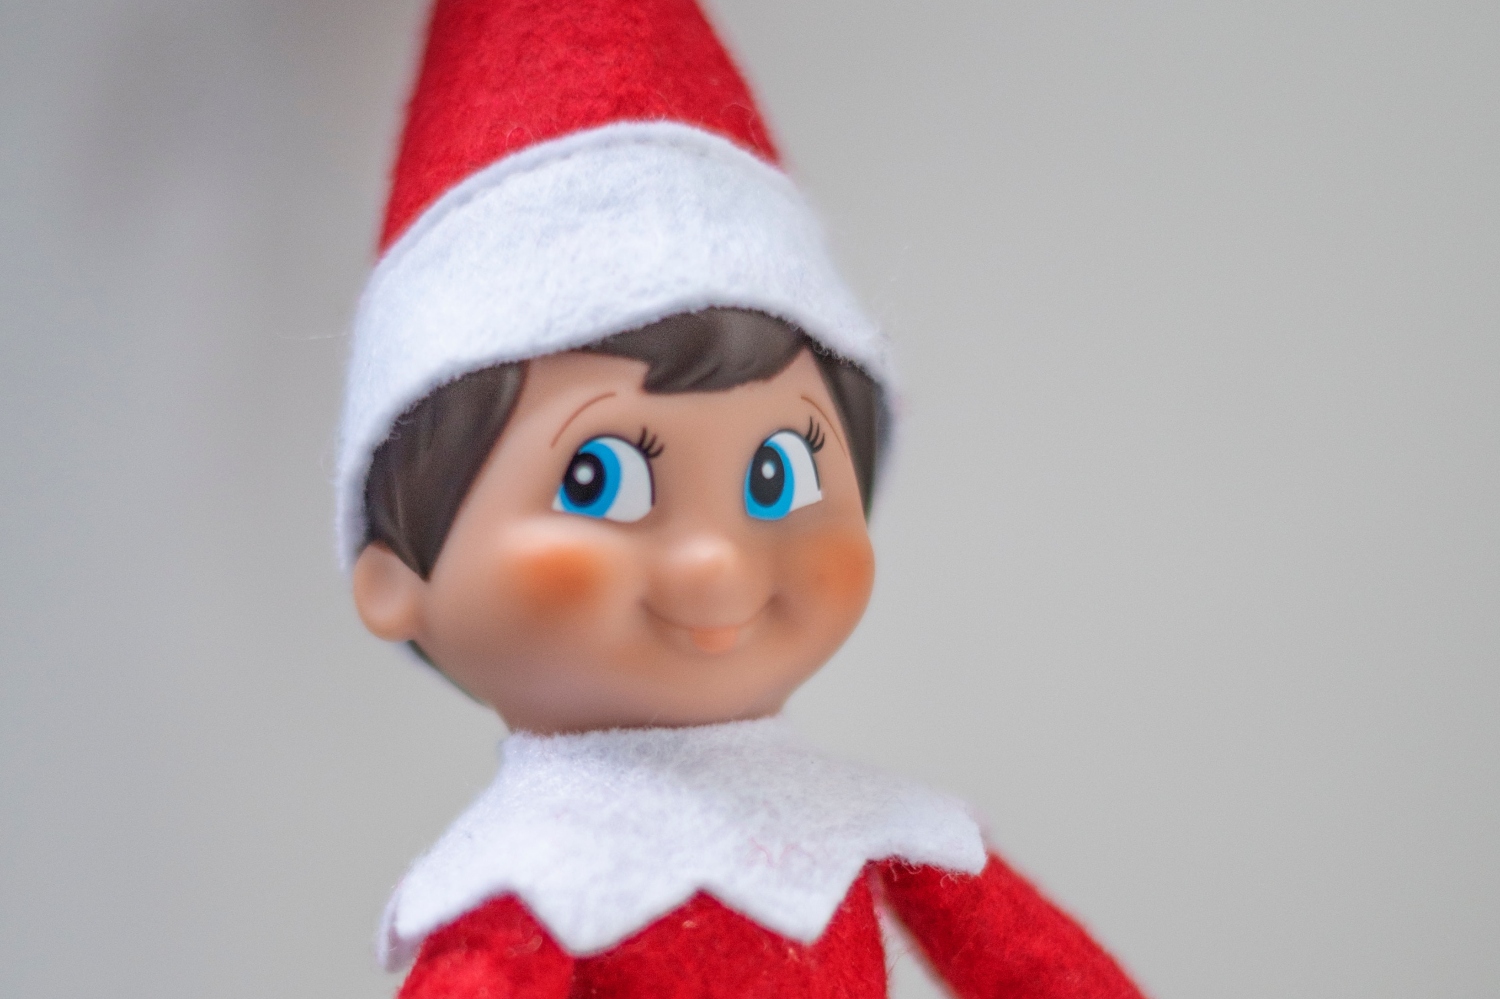 Close up photo of a toy elf